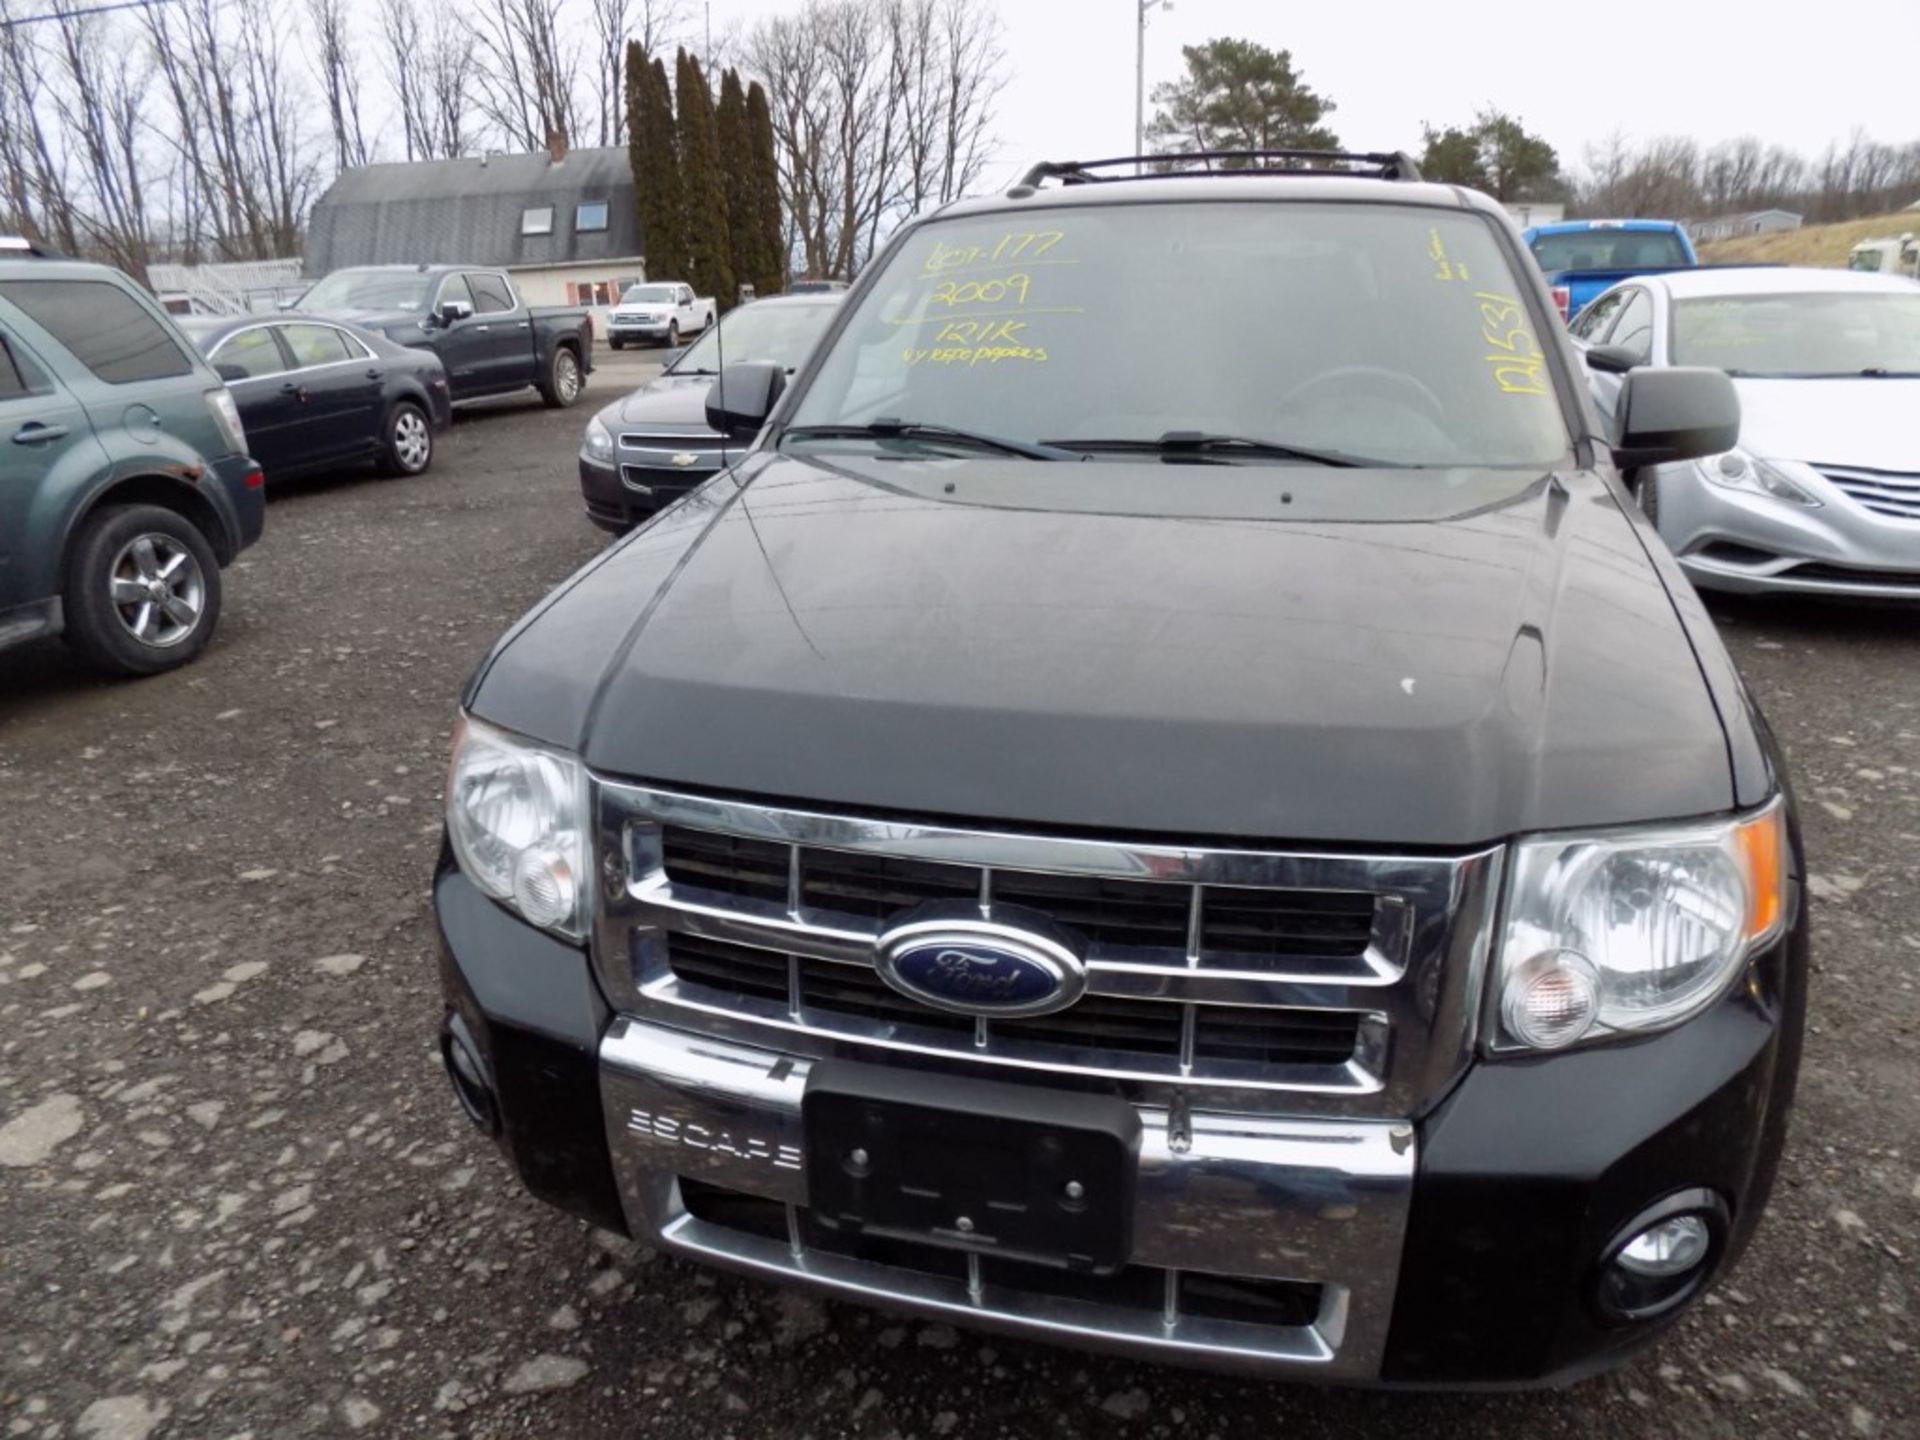 2009 Ford Escape Limited, 4x4, Black, Leather, Sunroof, 121,531 Miles, VIN#: 1FMCU94G09KC66421, - Image 3 of 12